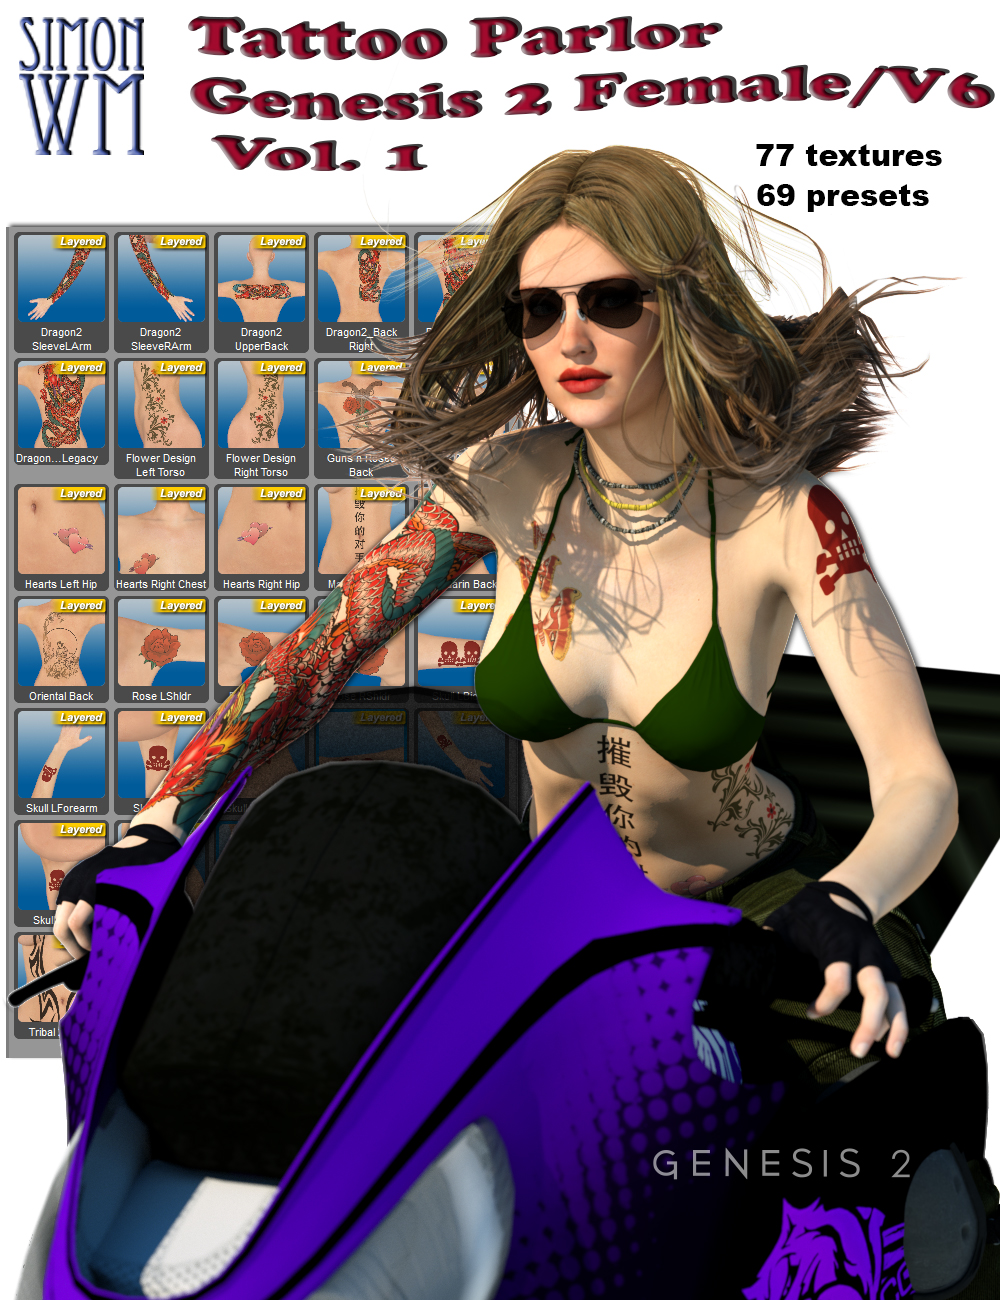 Tattoo Parlor Genesis 2 Female and V6 Vol. 1 by: SimonWM, 3D Models by Daz 3D